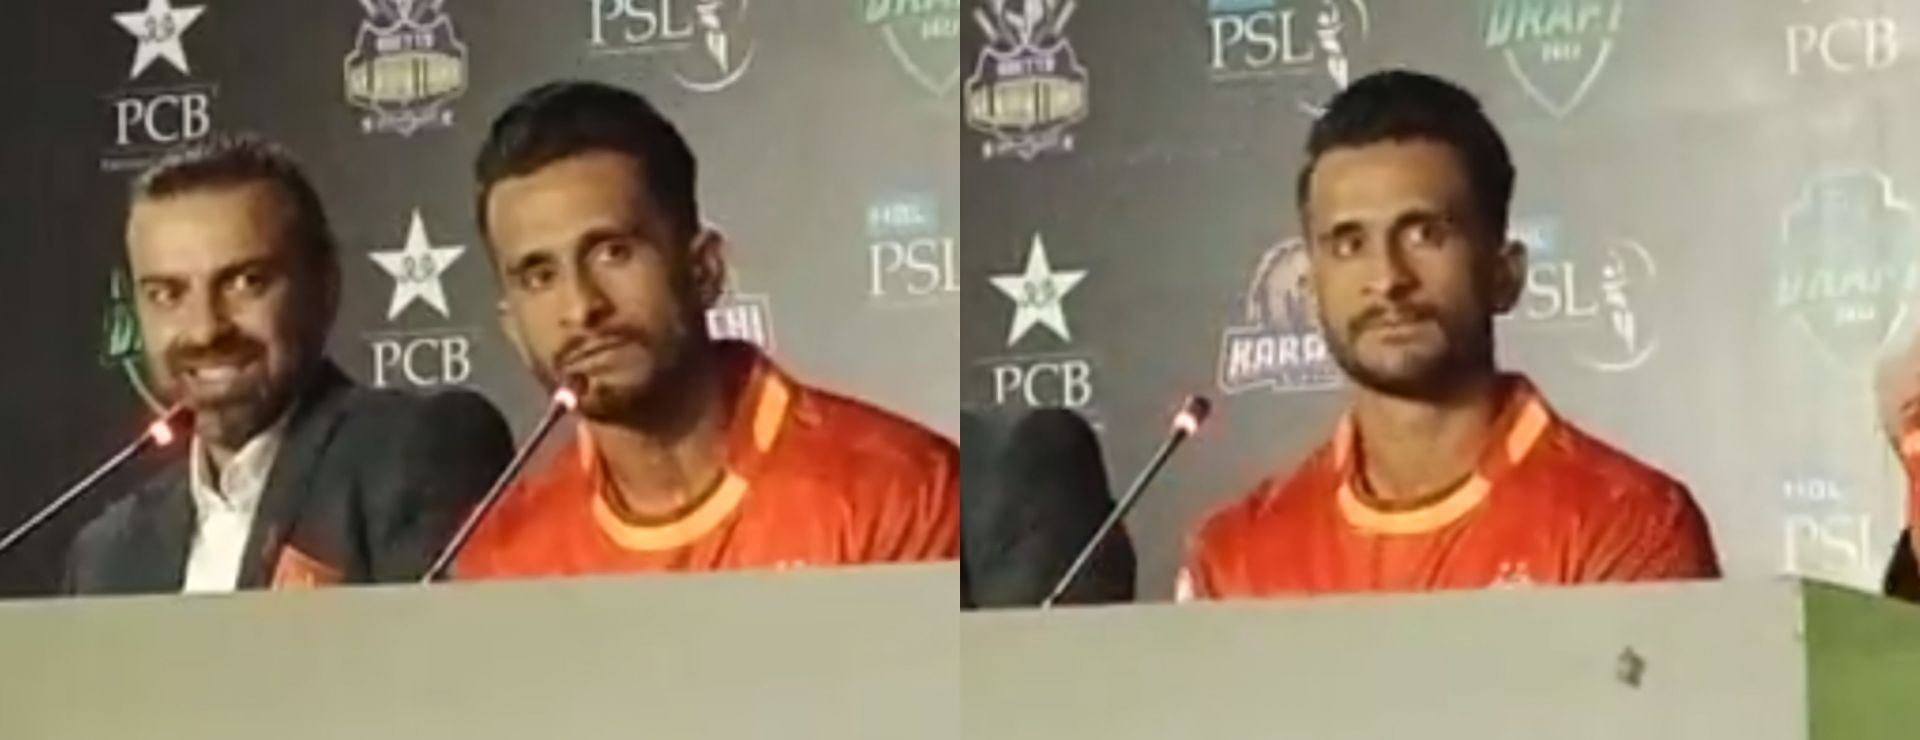 Screengrabs from Hasan Ali&#039;s PSL press conference